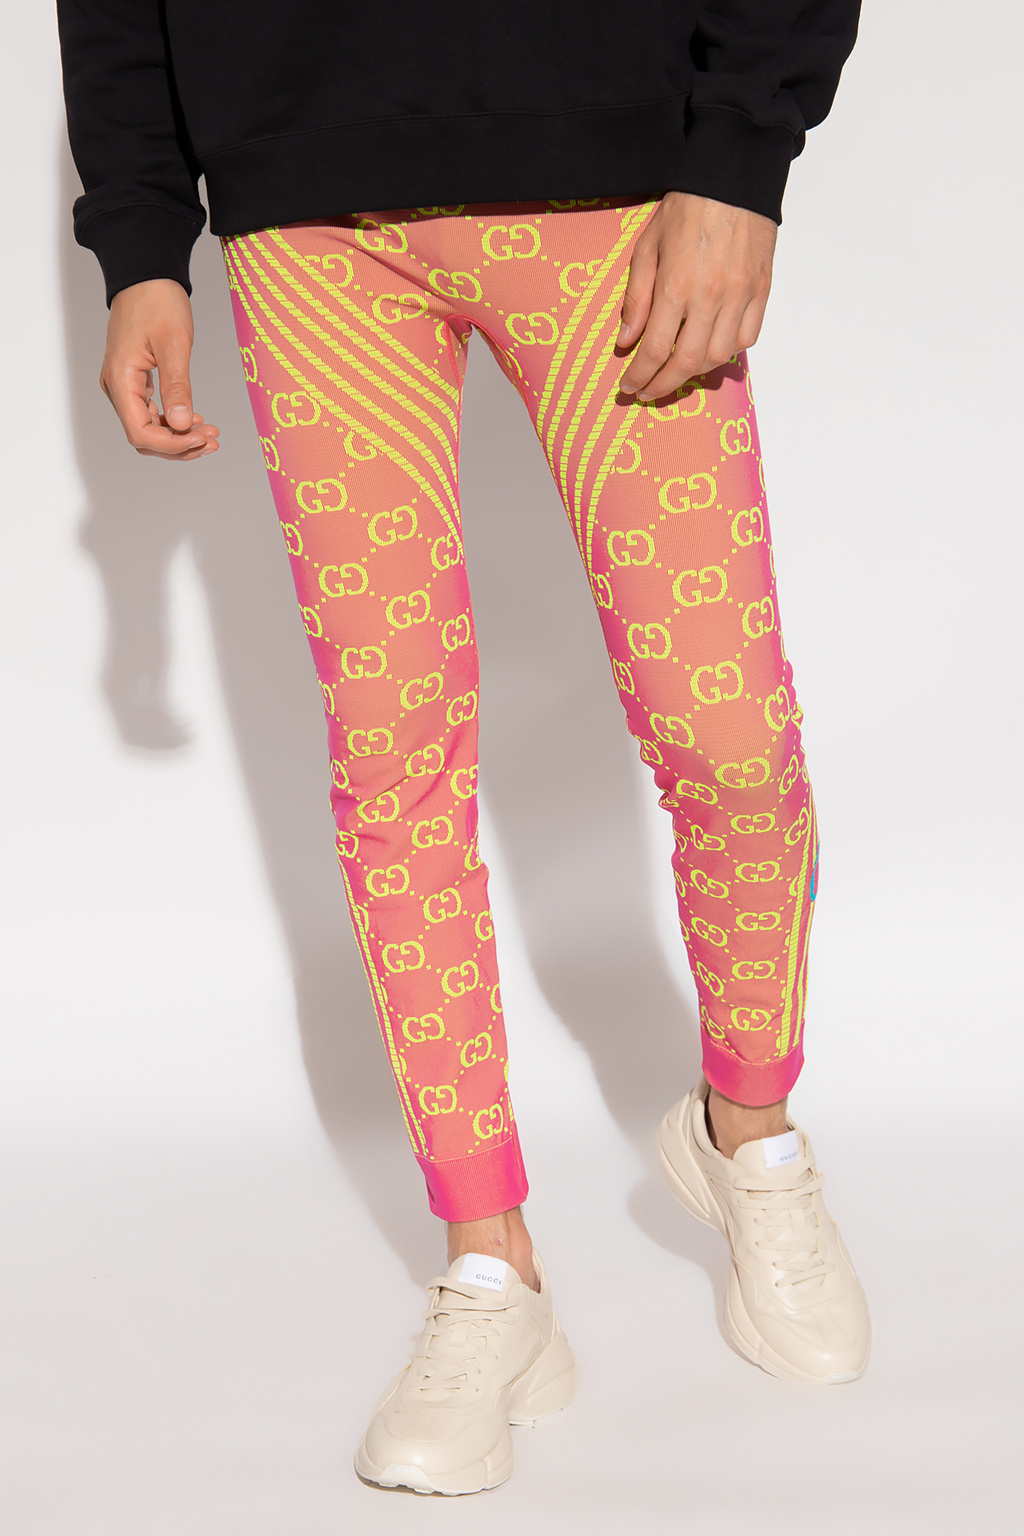 Gucci Leggings with 'GG' pattern, StclaircomoShops